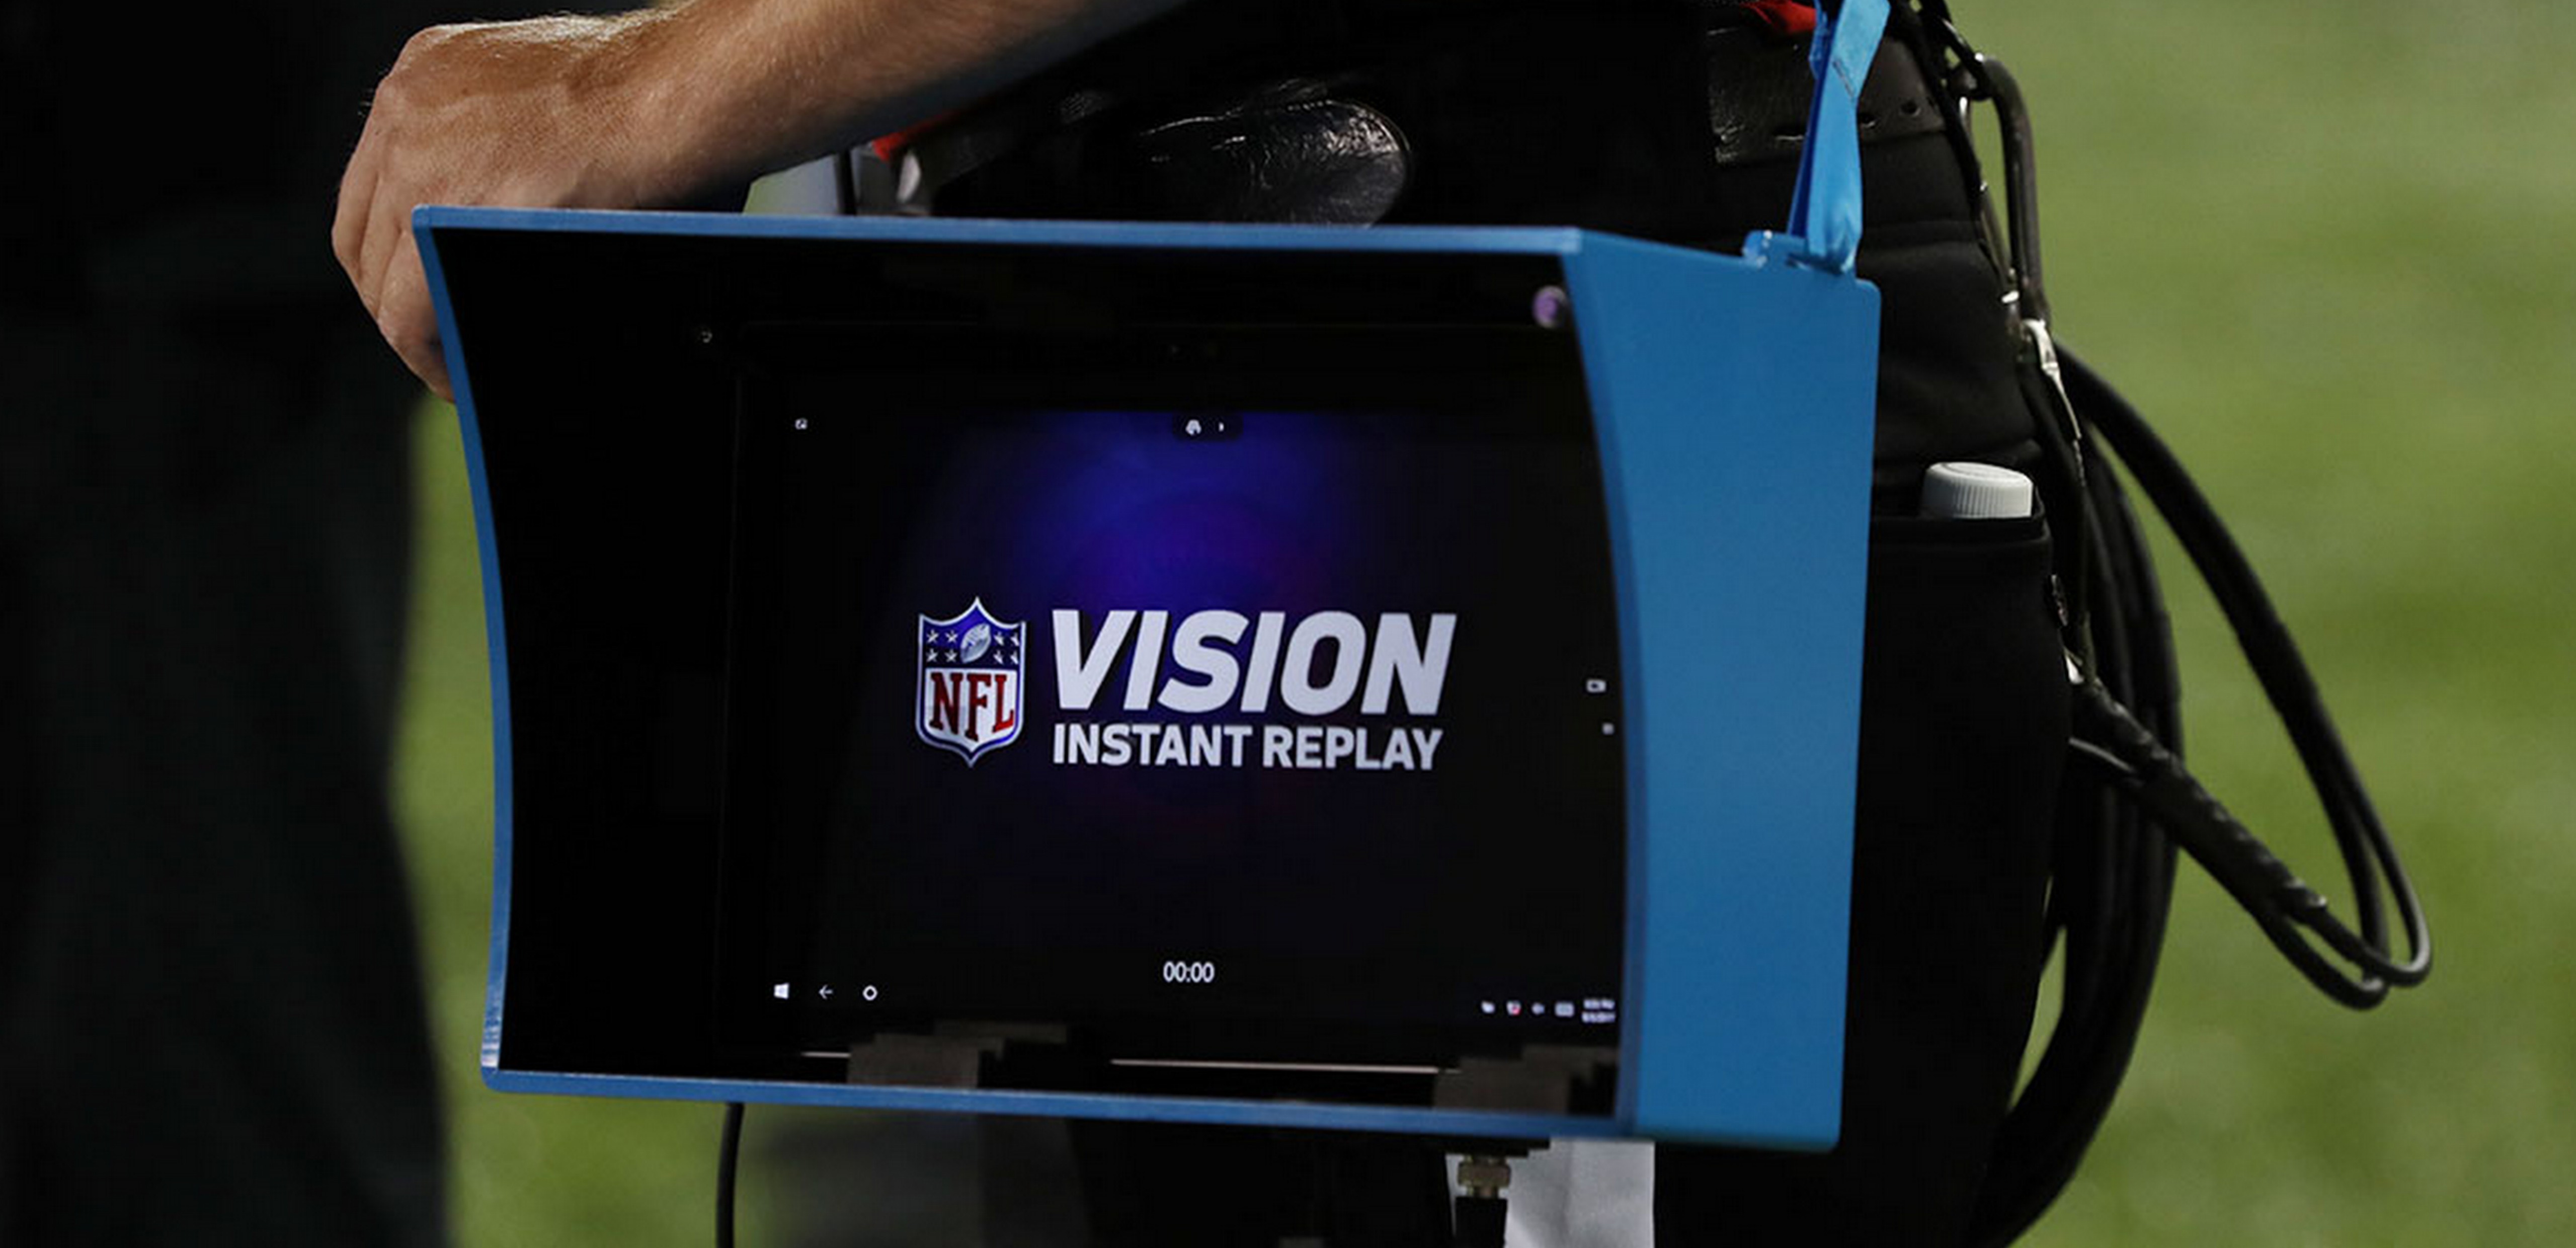 Surface Pro 4 is an integral part of the new Instant Replay system.